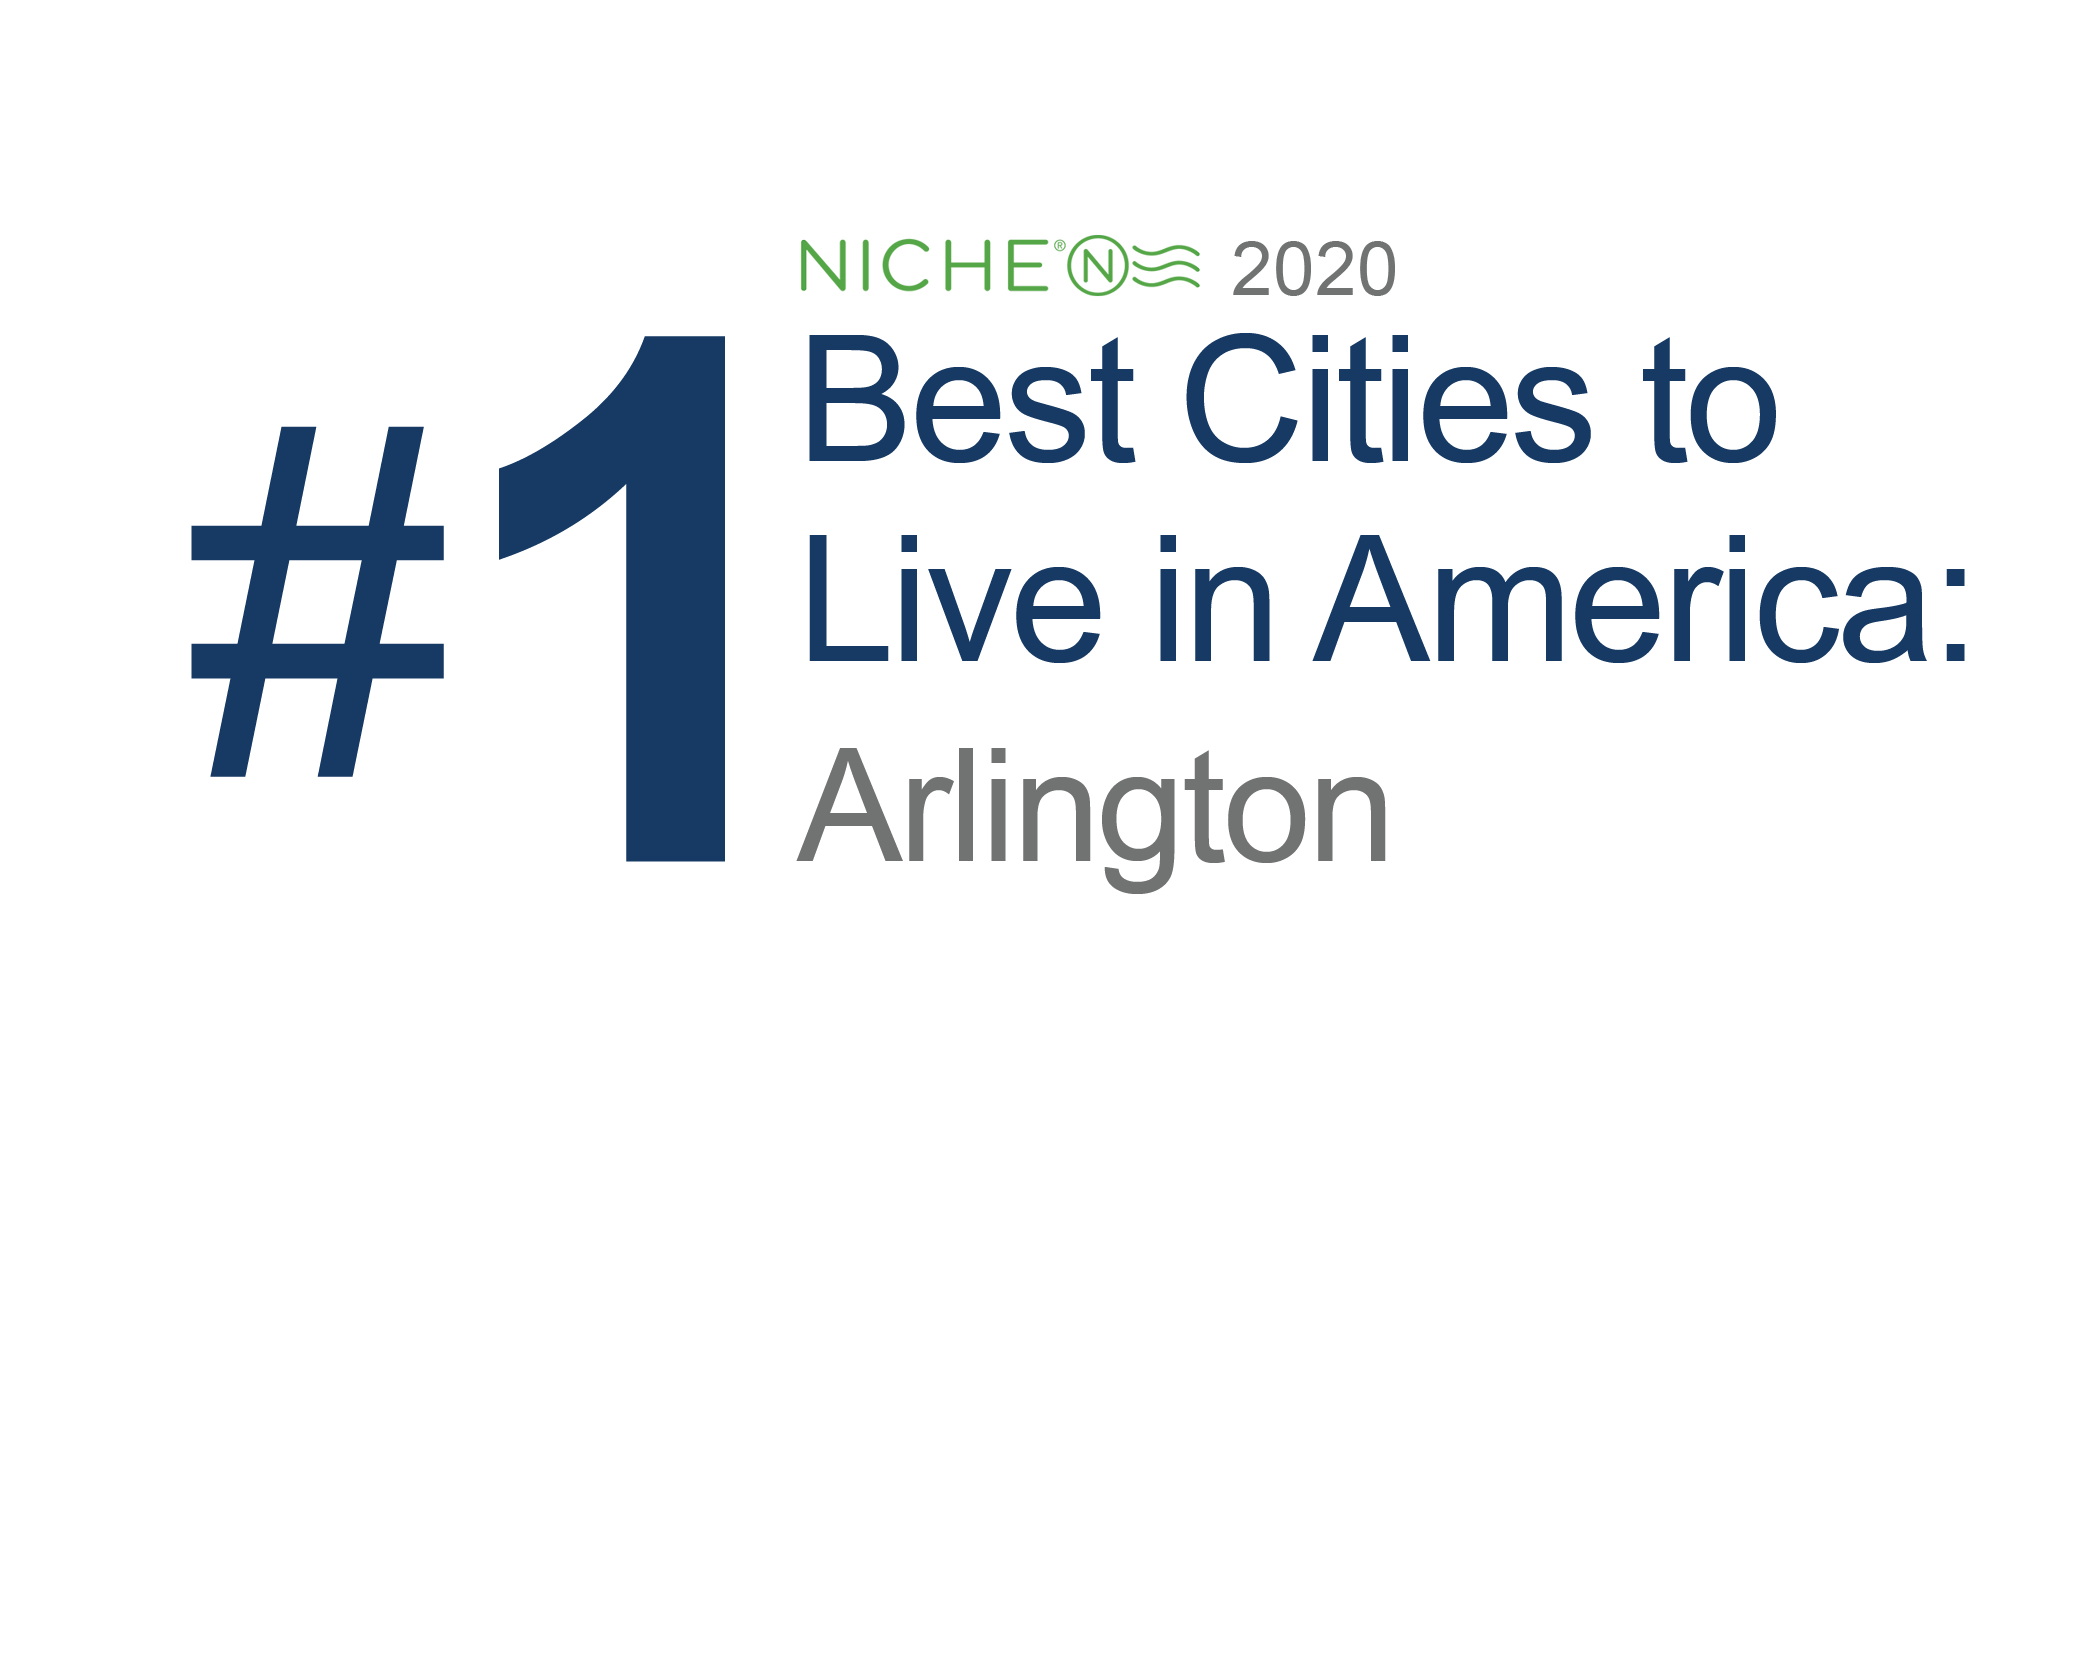 Niche_#1_2020_Best Cities to Live in America